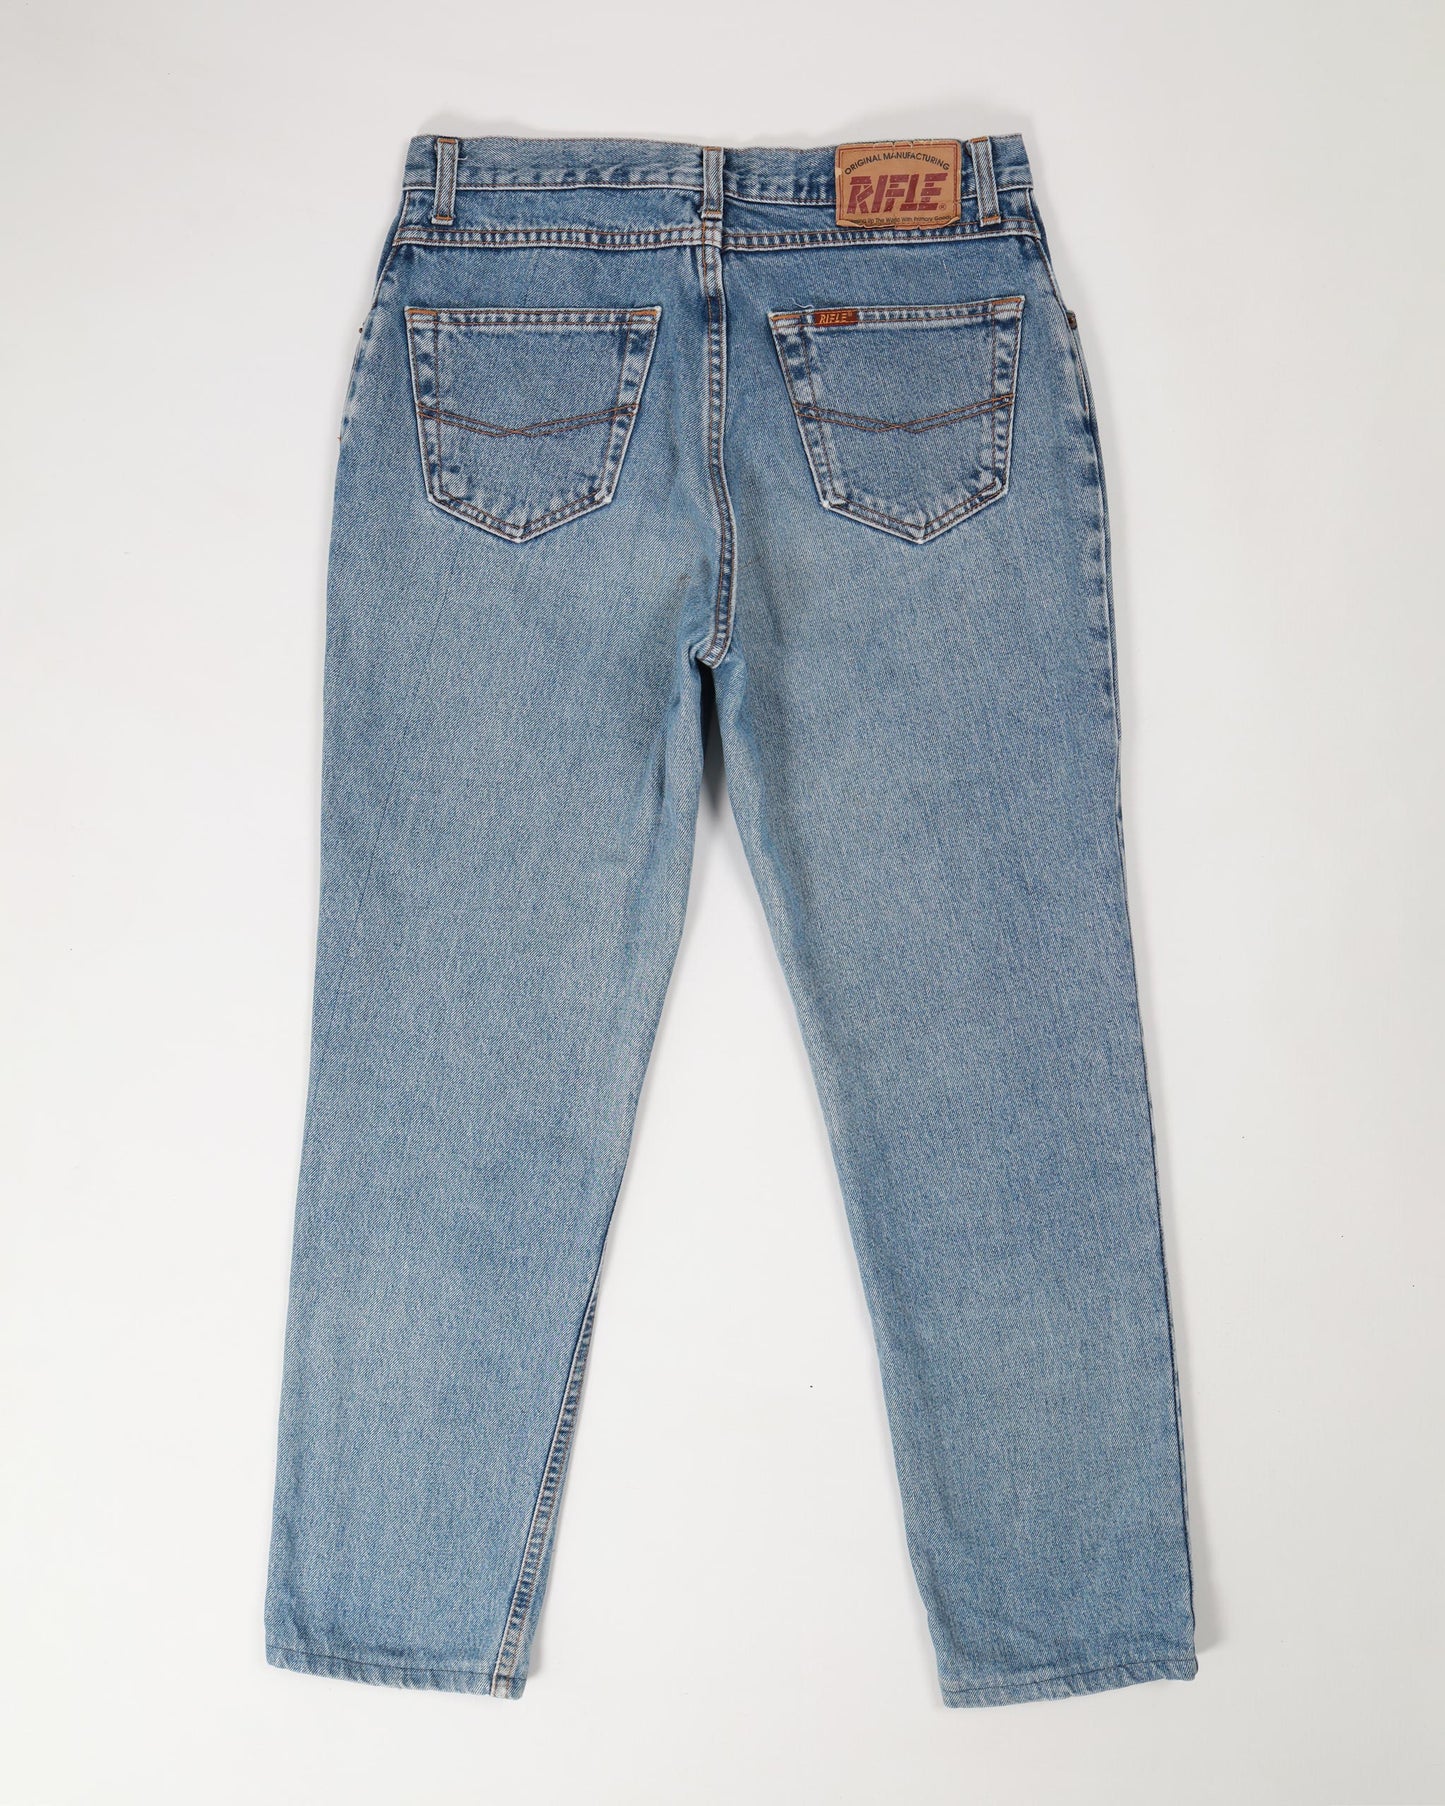 Rifle Tapered Fit Denim Jeans in Blue Size W30